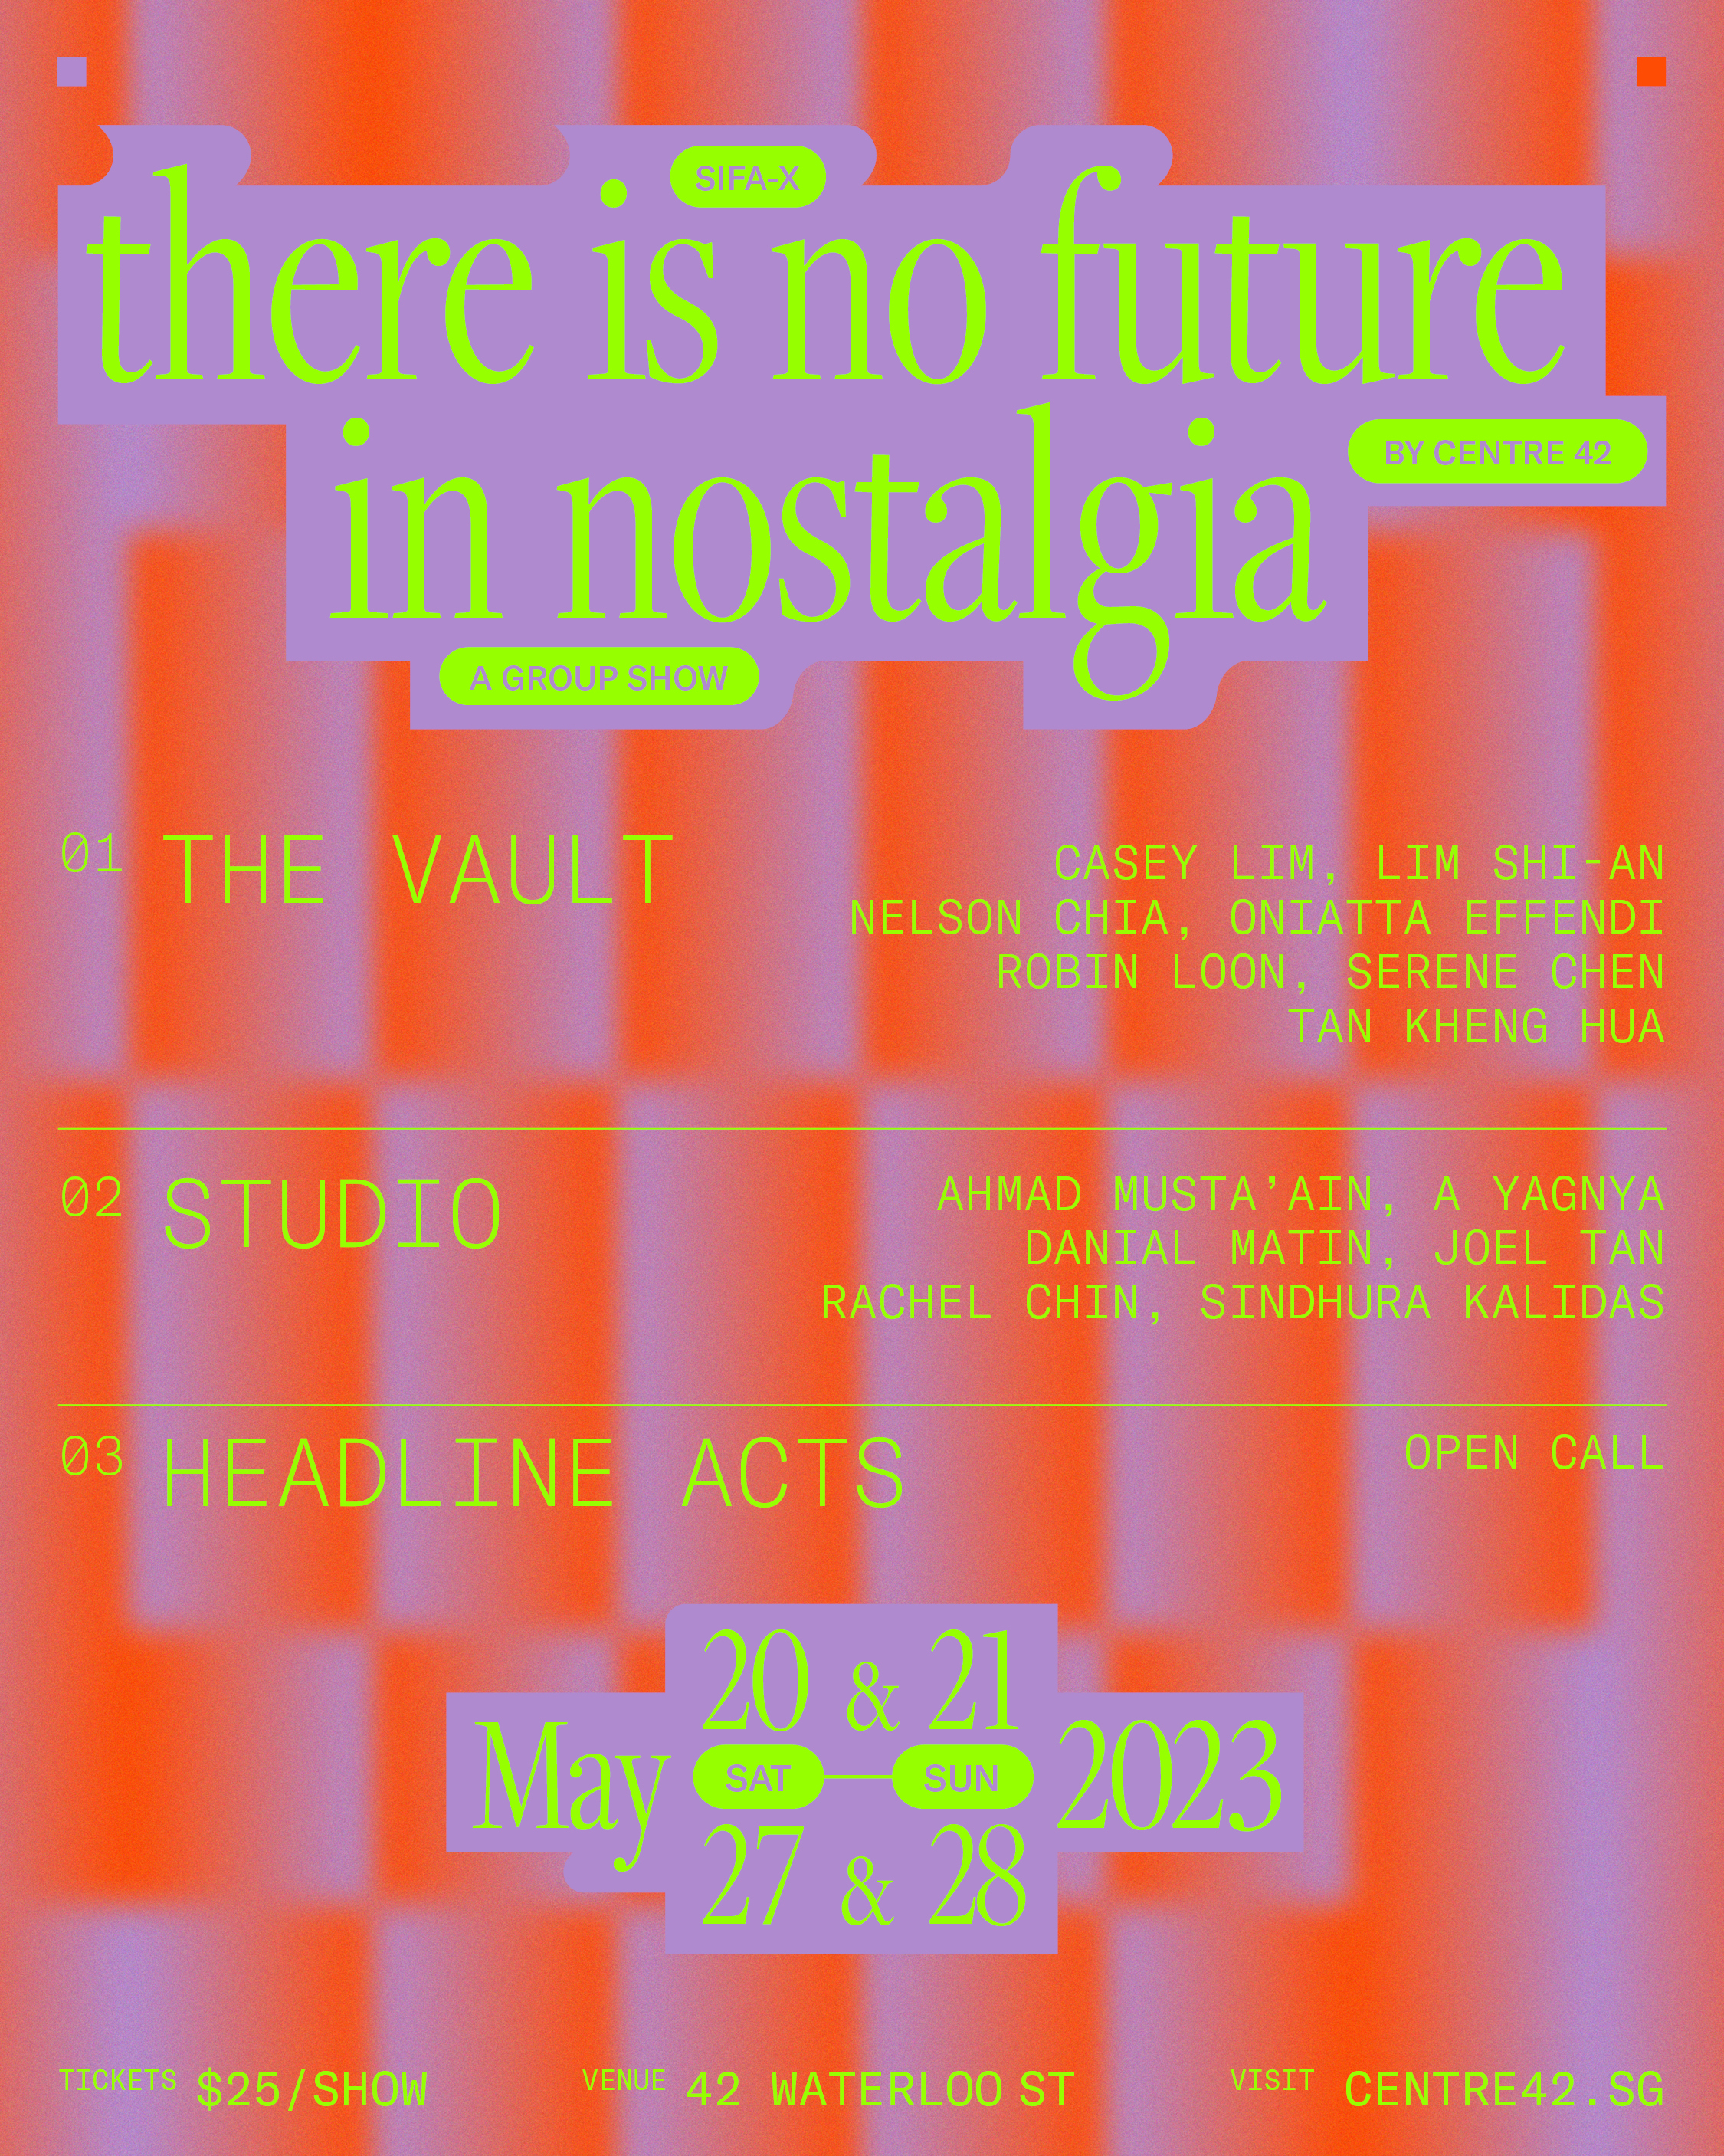 Neon green text displaying the title "SIFA-X there is no future in nostalgia by Centre 42. A Group Show" and a list of artist names, against a backdrop of bright orange and purple textures